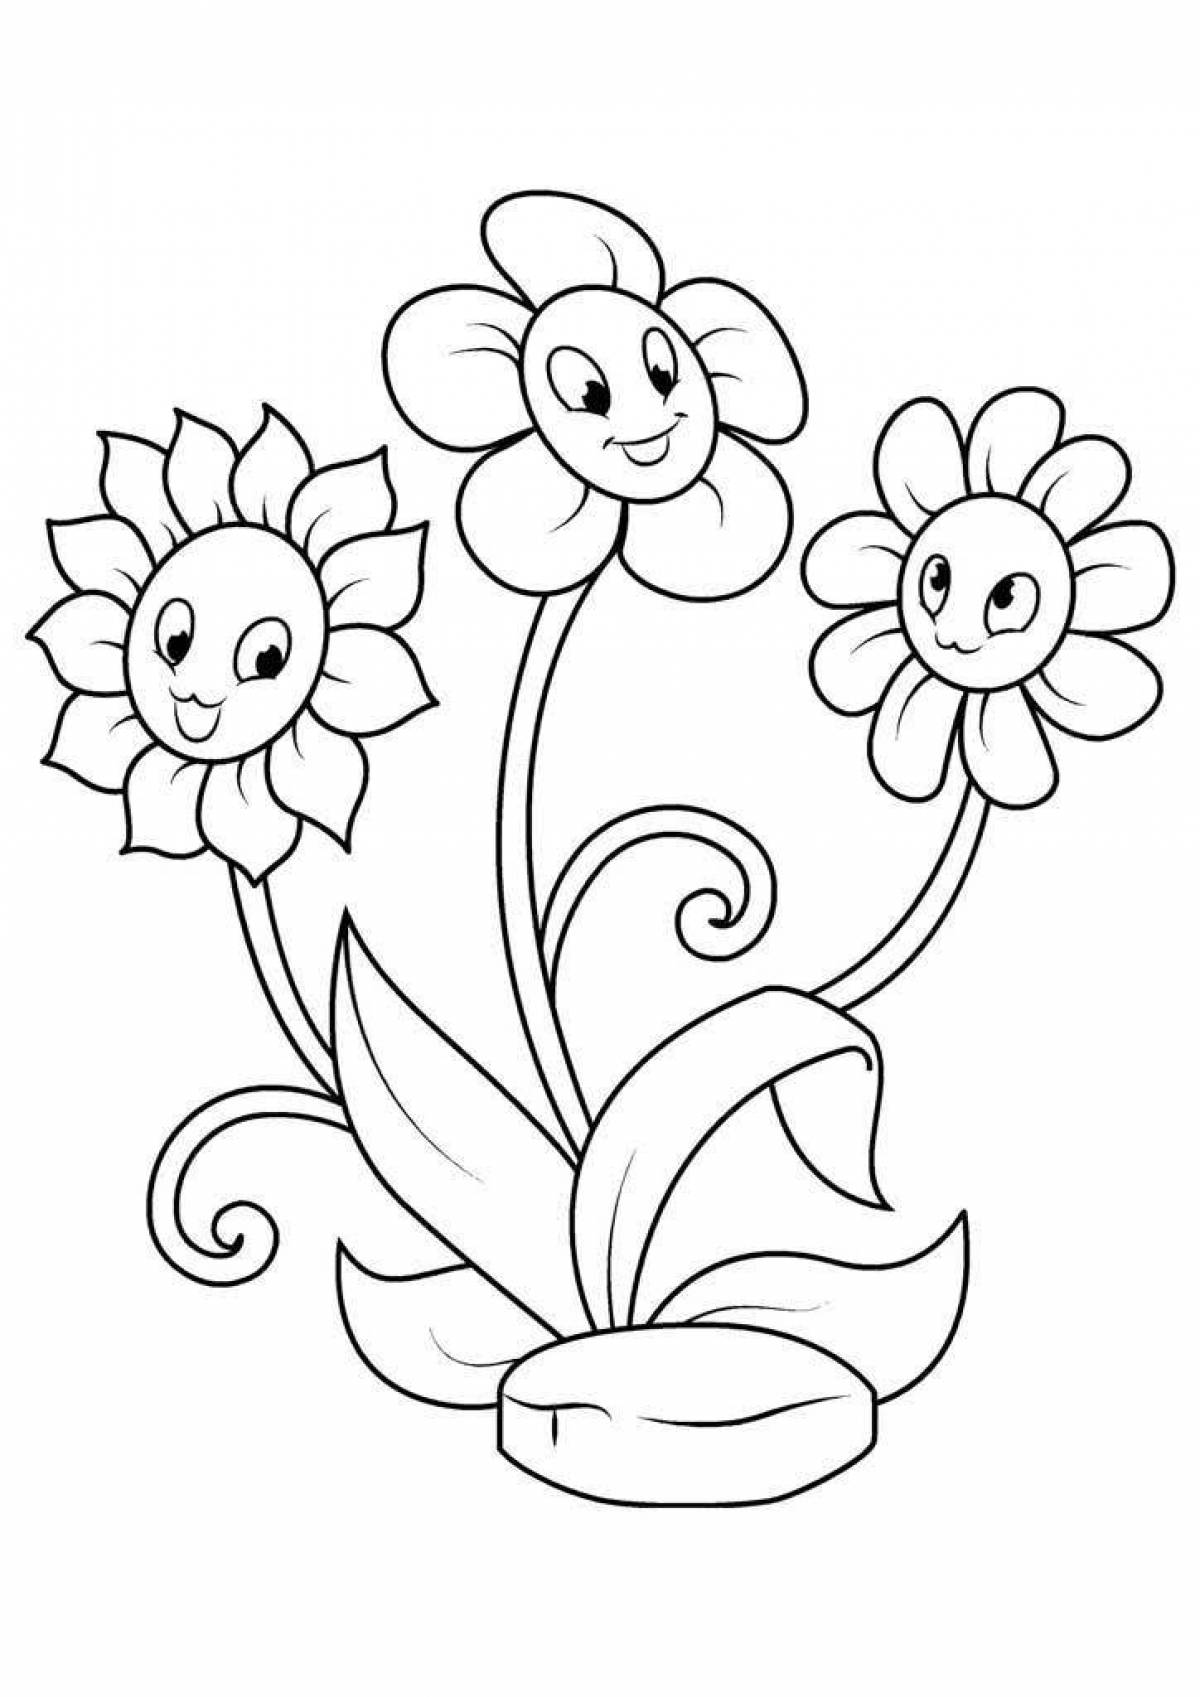 Blissful coloring flowers for children 3-4 years old